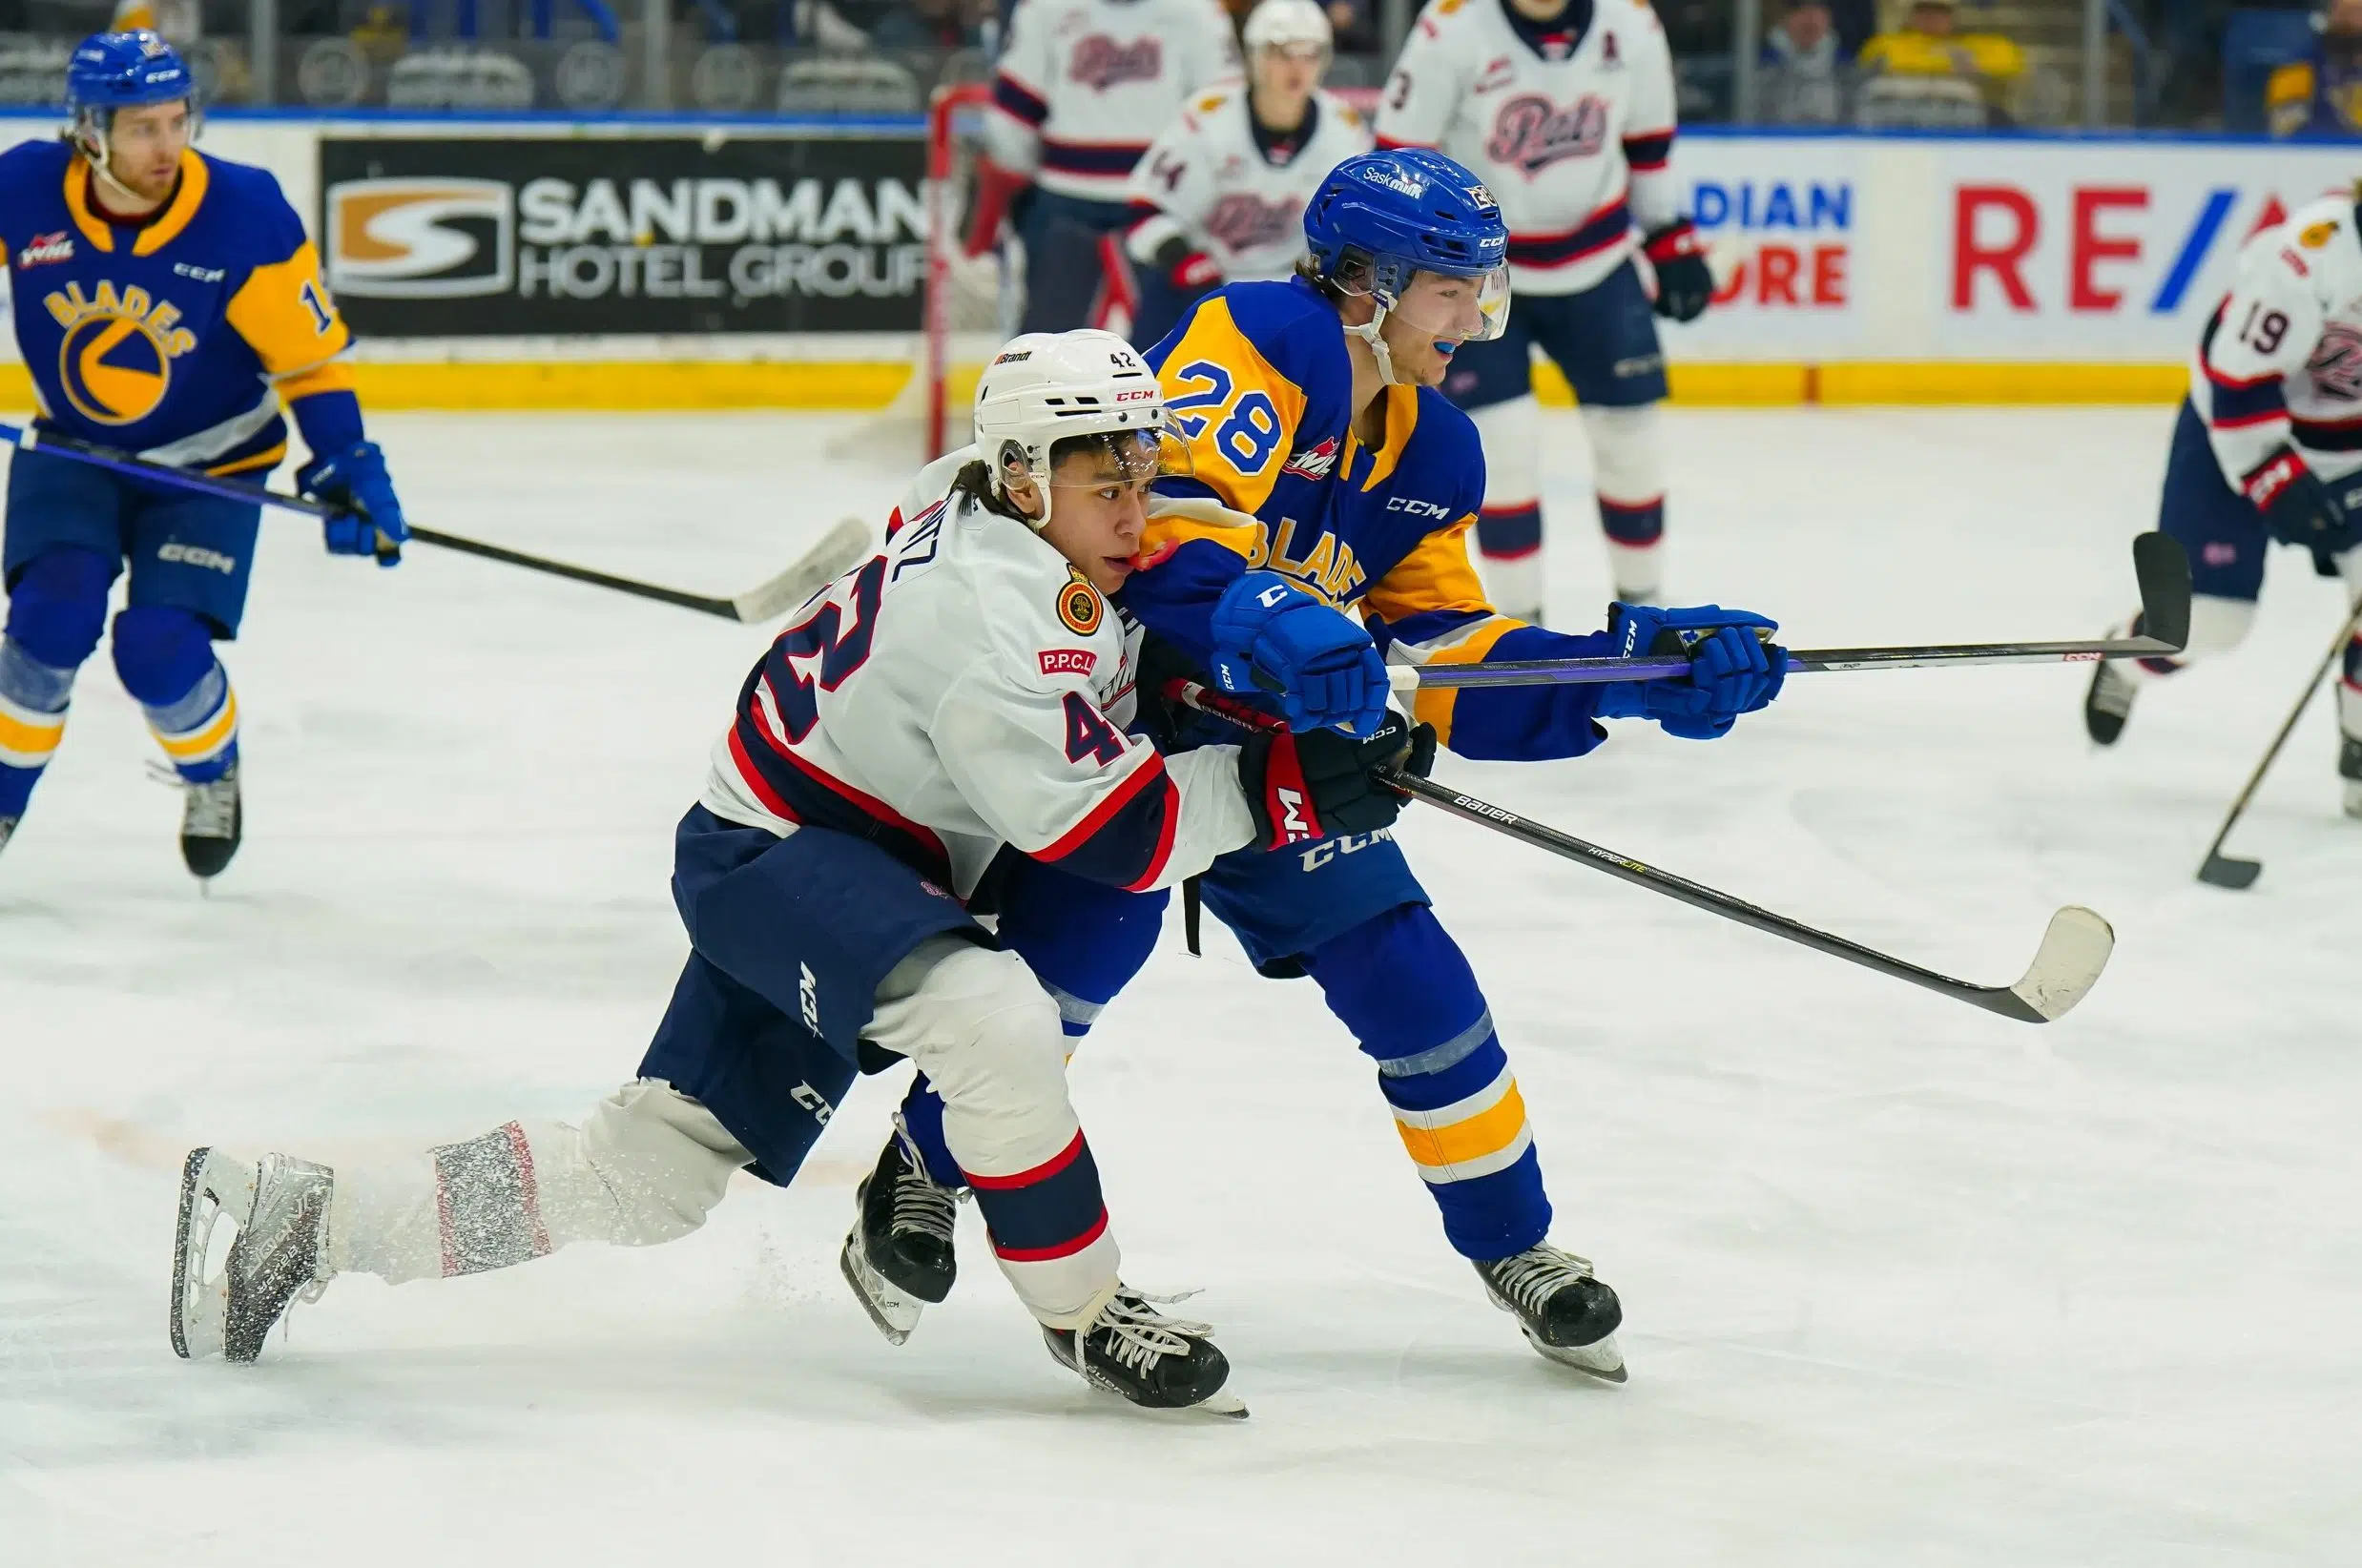 Blades look to close out series, while Pats try to stay alive in Game 6